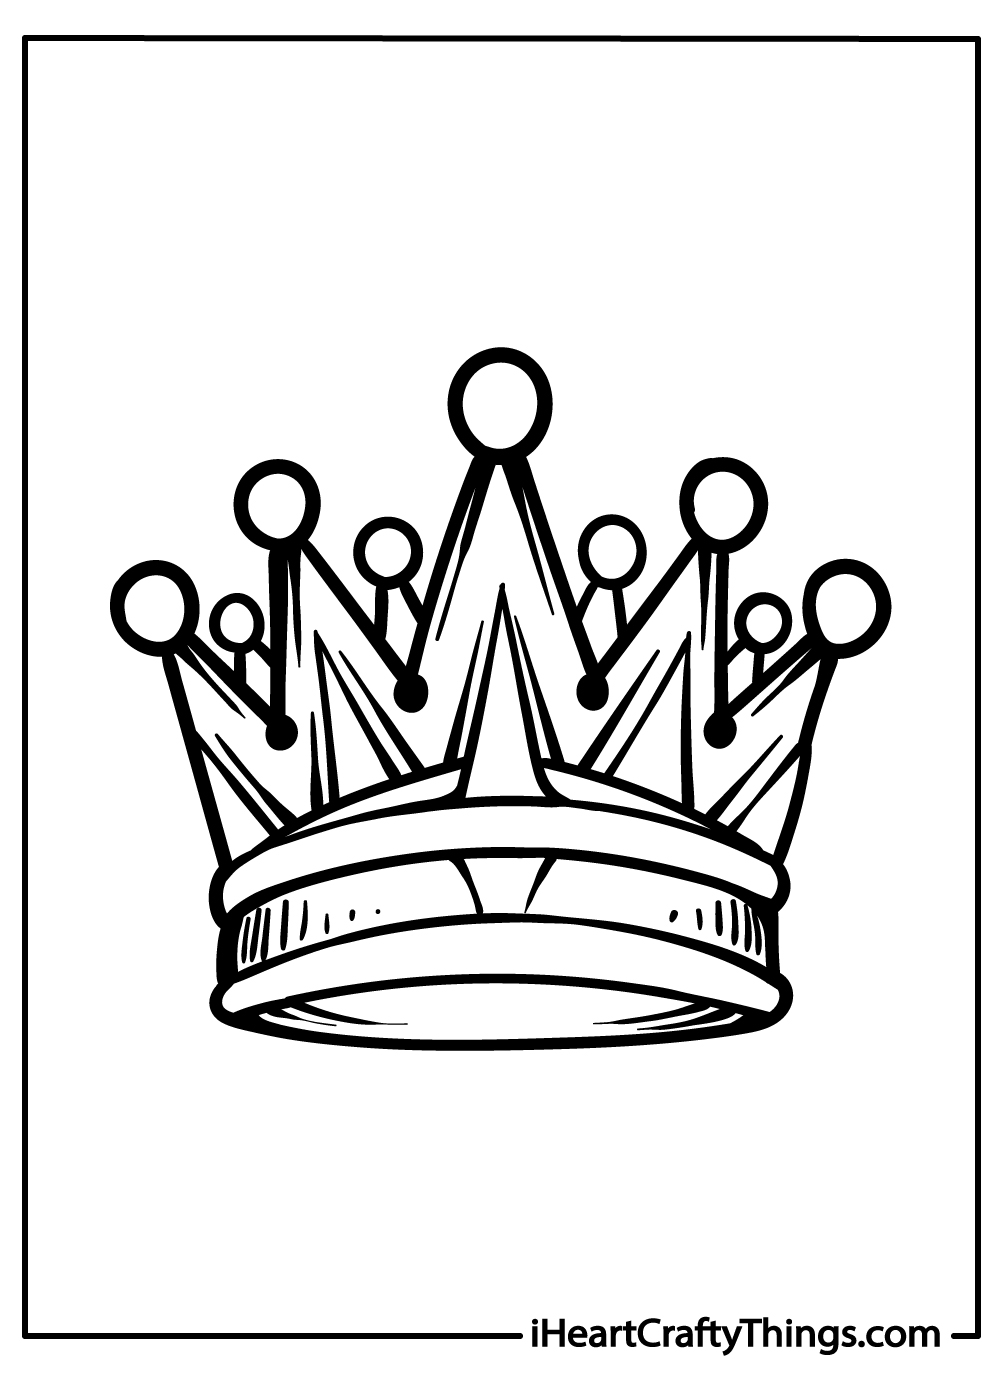 black-and-white crown coloring printable